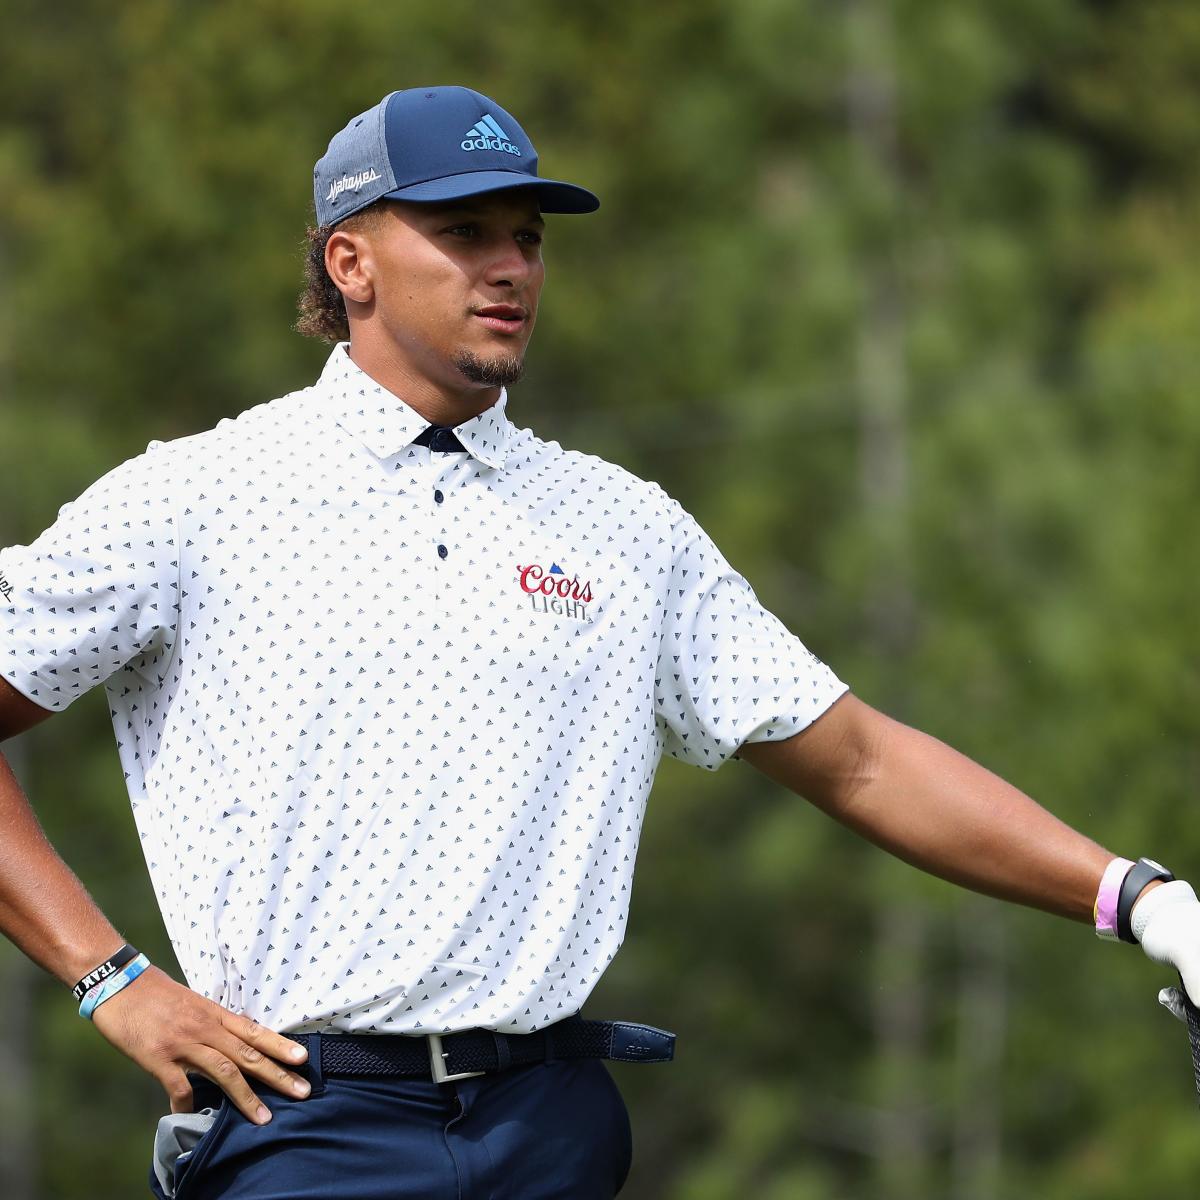 Patrick Mahomes, Steph Curry Crimson meat up at American Century Championship Round 2